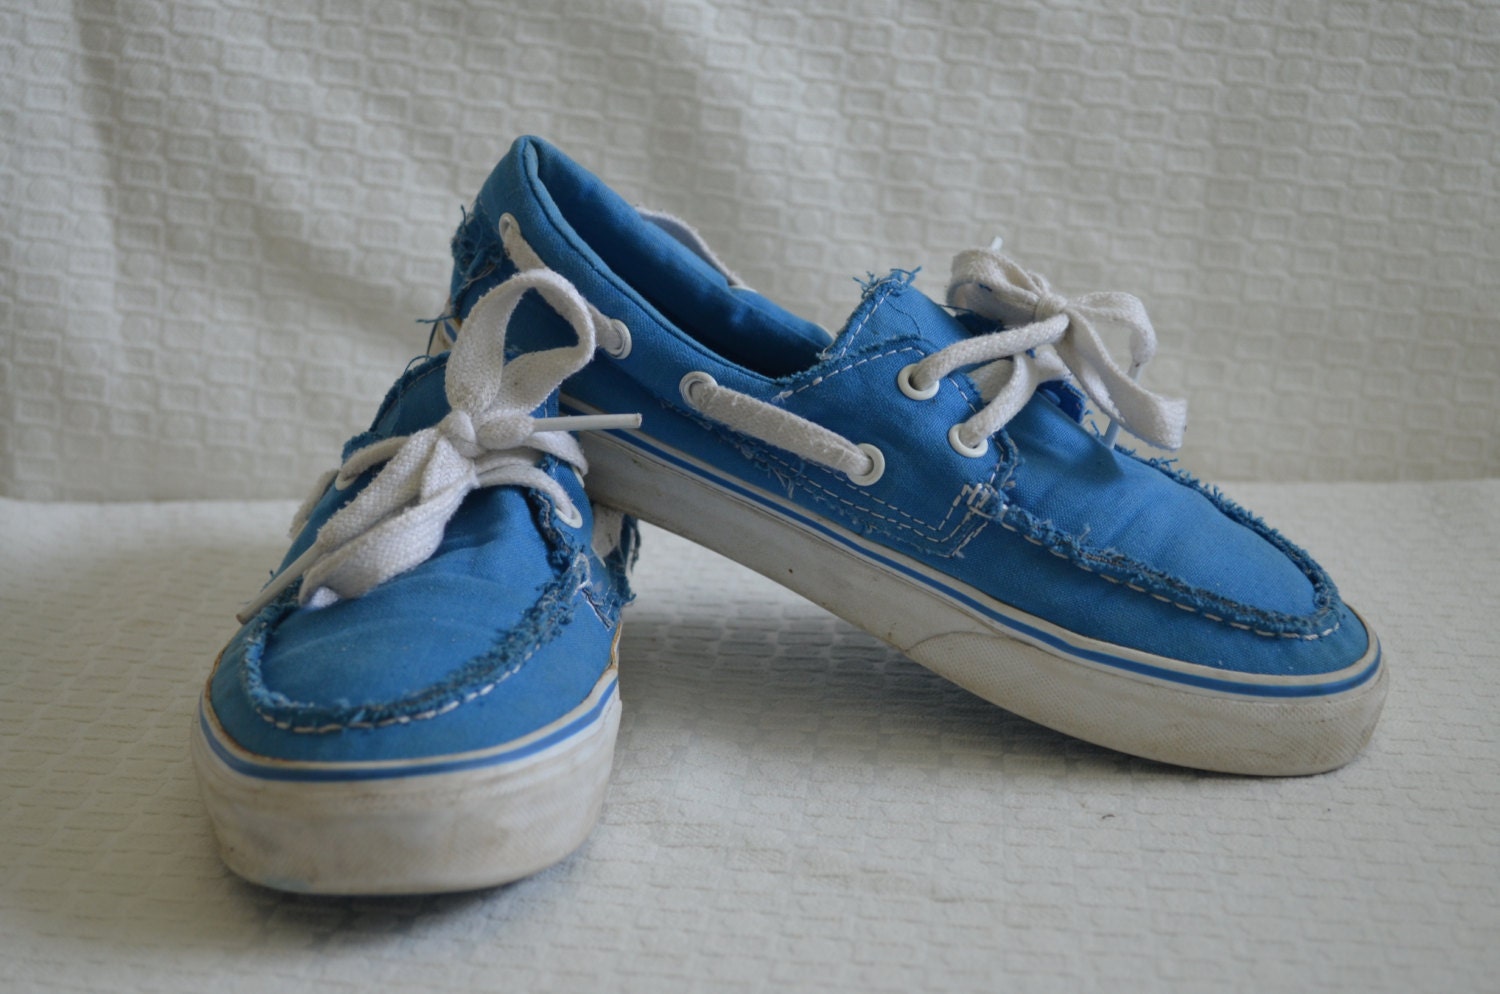 Throwback Bright Blue 'Vans' Boat Shoes Women's